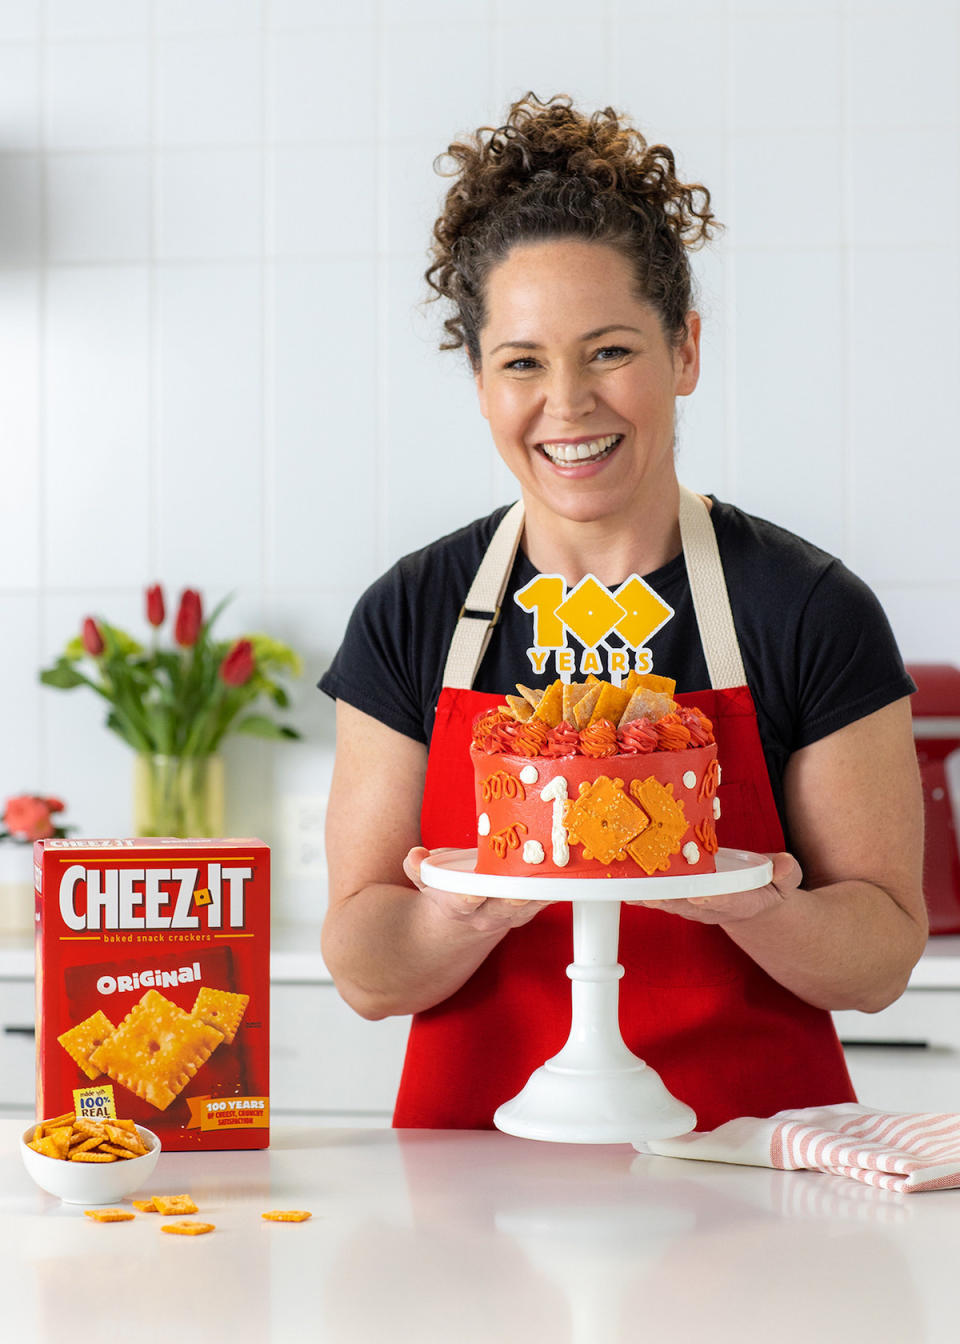 A chef holds a Cheez-It cake on a stand in a white room with a box of Cheez-it on the table